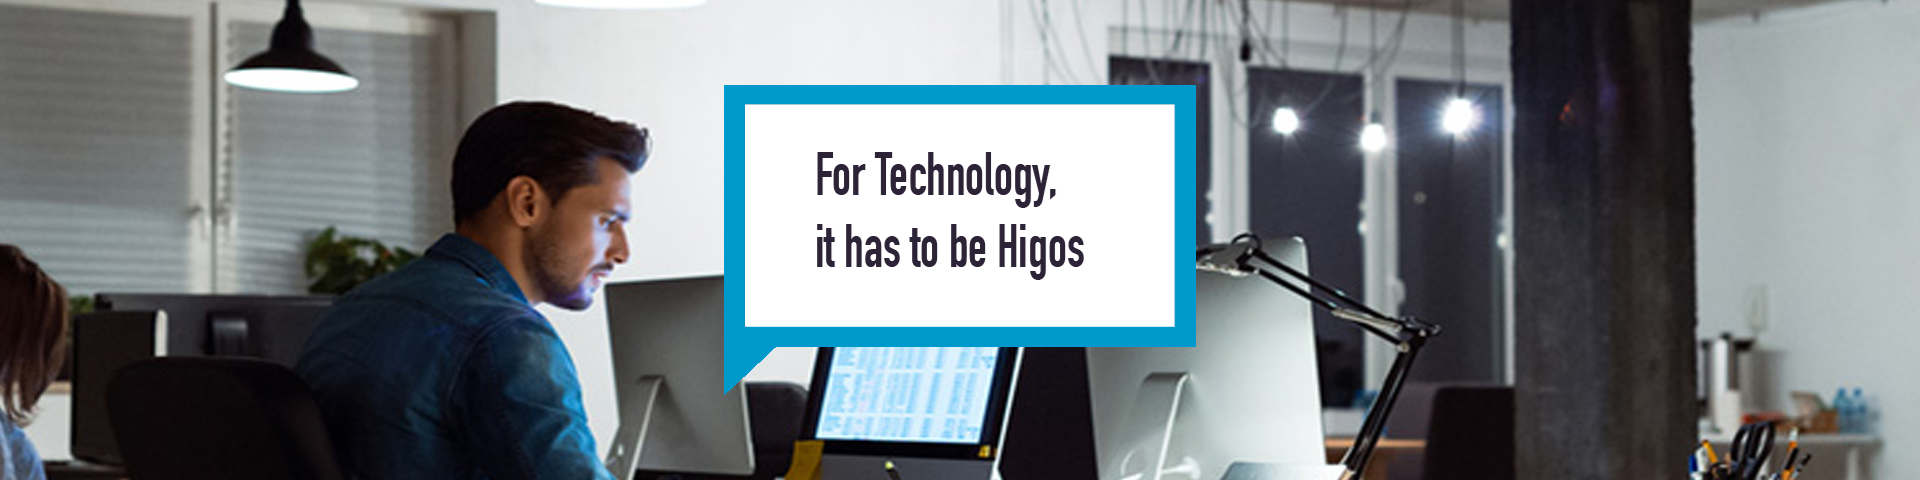 Higos business insurance technology office